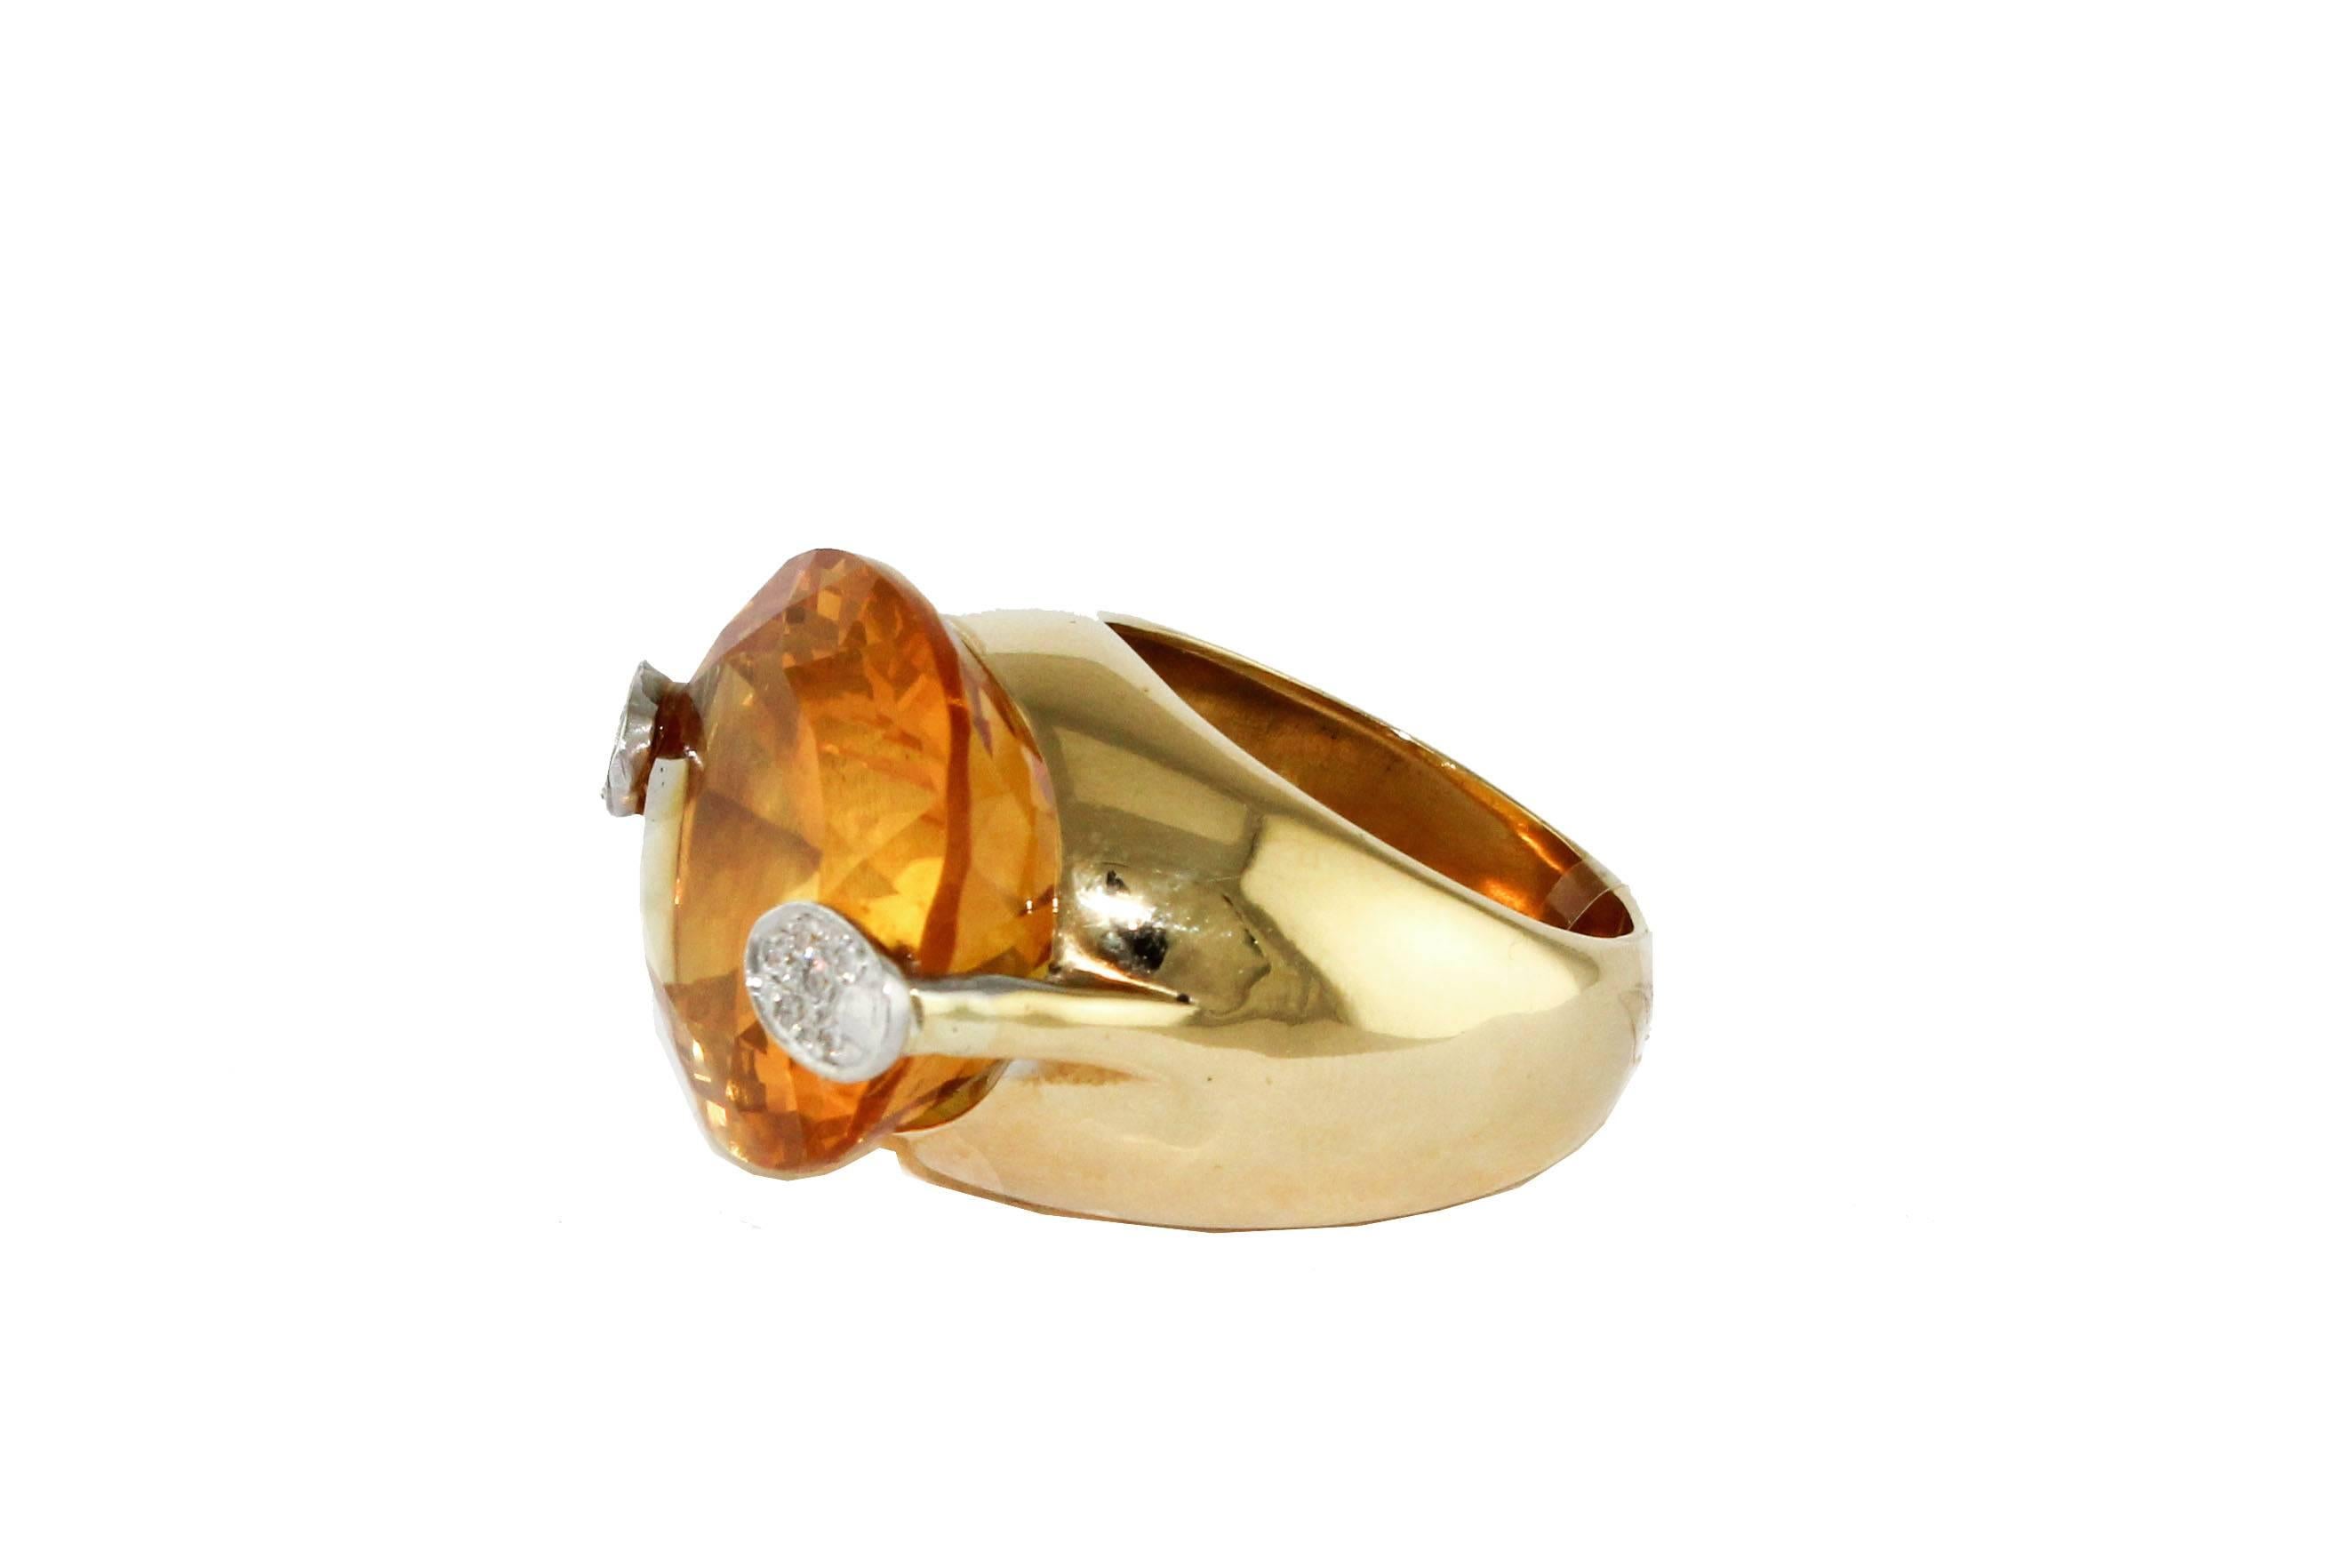 Fantastic ring in 18 kt yellow gold, from g 25, with diamonds of 0.22, and a beautiful central Topaz from ct 54.57.
Diamonds ct 0.22
Topaz ct 54.57
Total weight g 25
Size ita 20
Size franc 60
Size uses 9.17
R.F + ucai

For any enquires, please